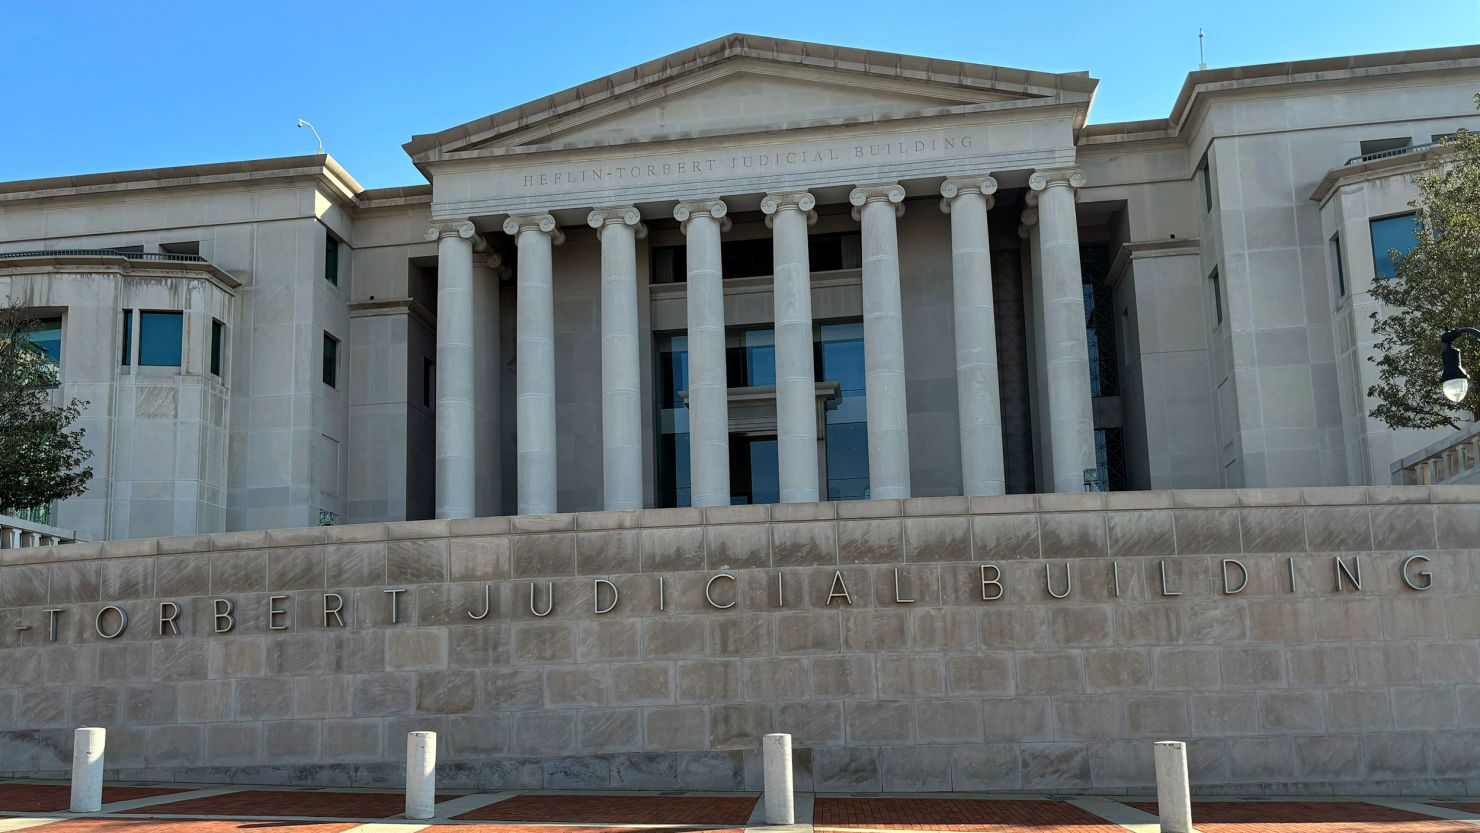 The Alabama Supreme Court building in Montgomery is pictured earlier this month.